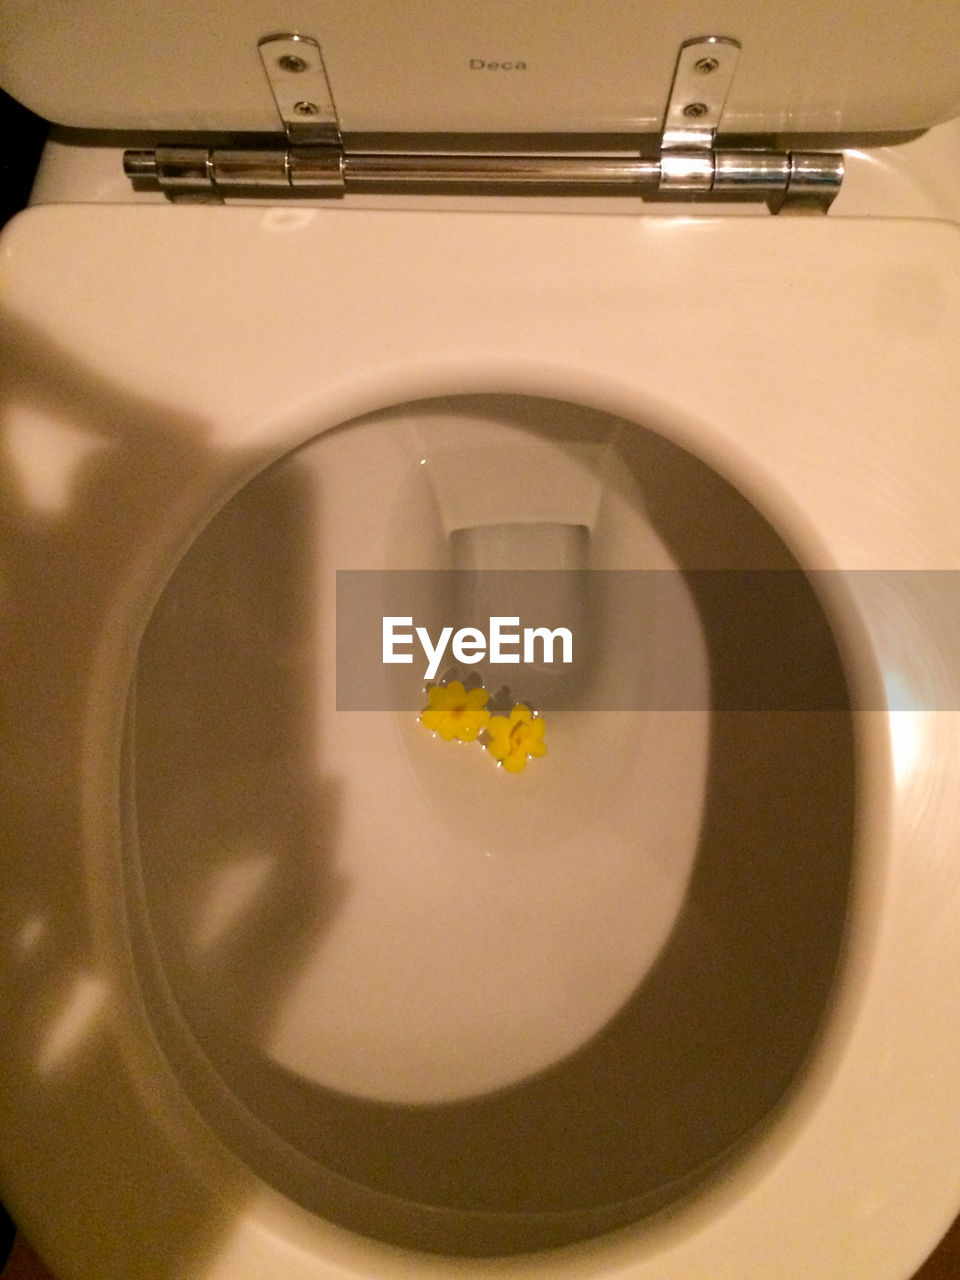 Toilet with yellow flower in the water